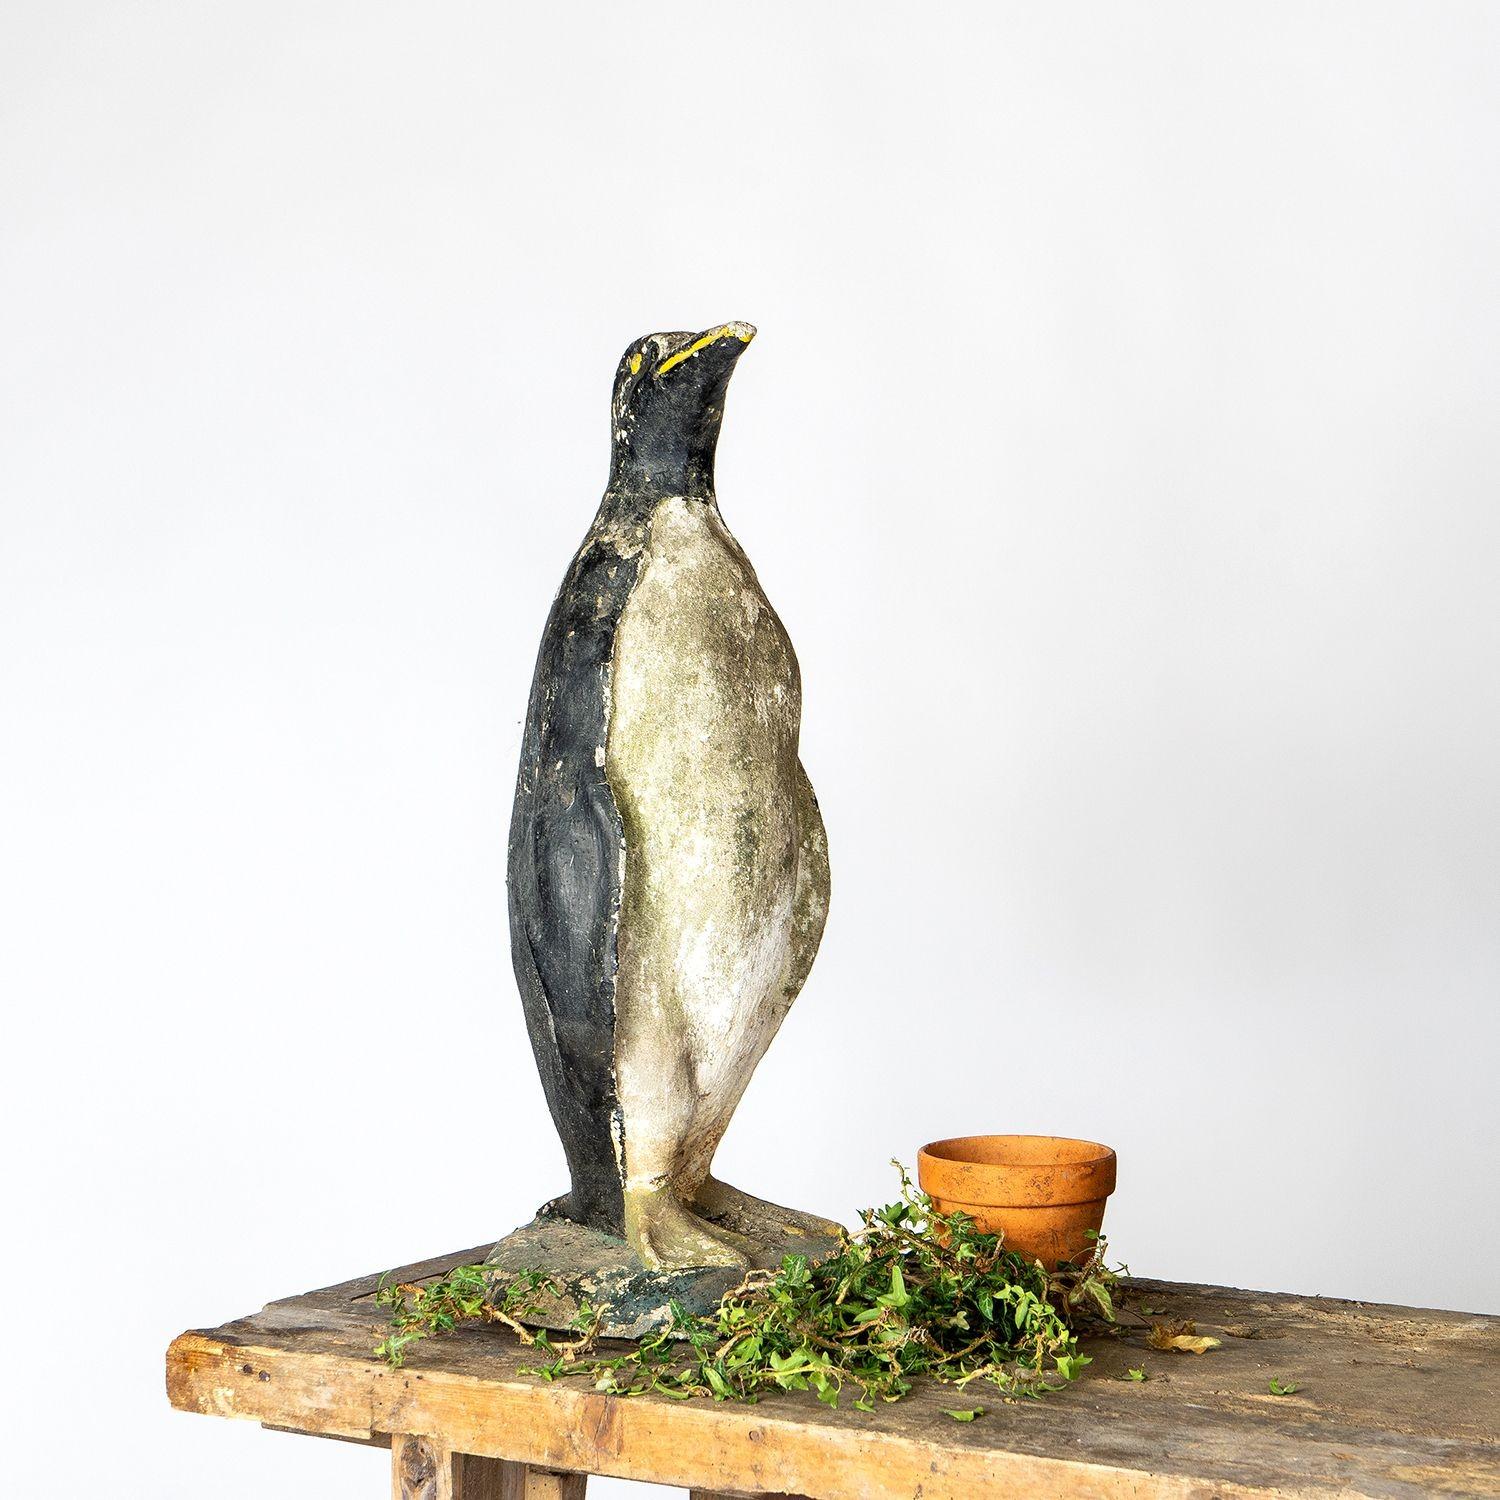 Vintage French Reconstituted Stone Penguin Garden Statue Figure c. 1930s 4